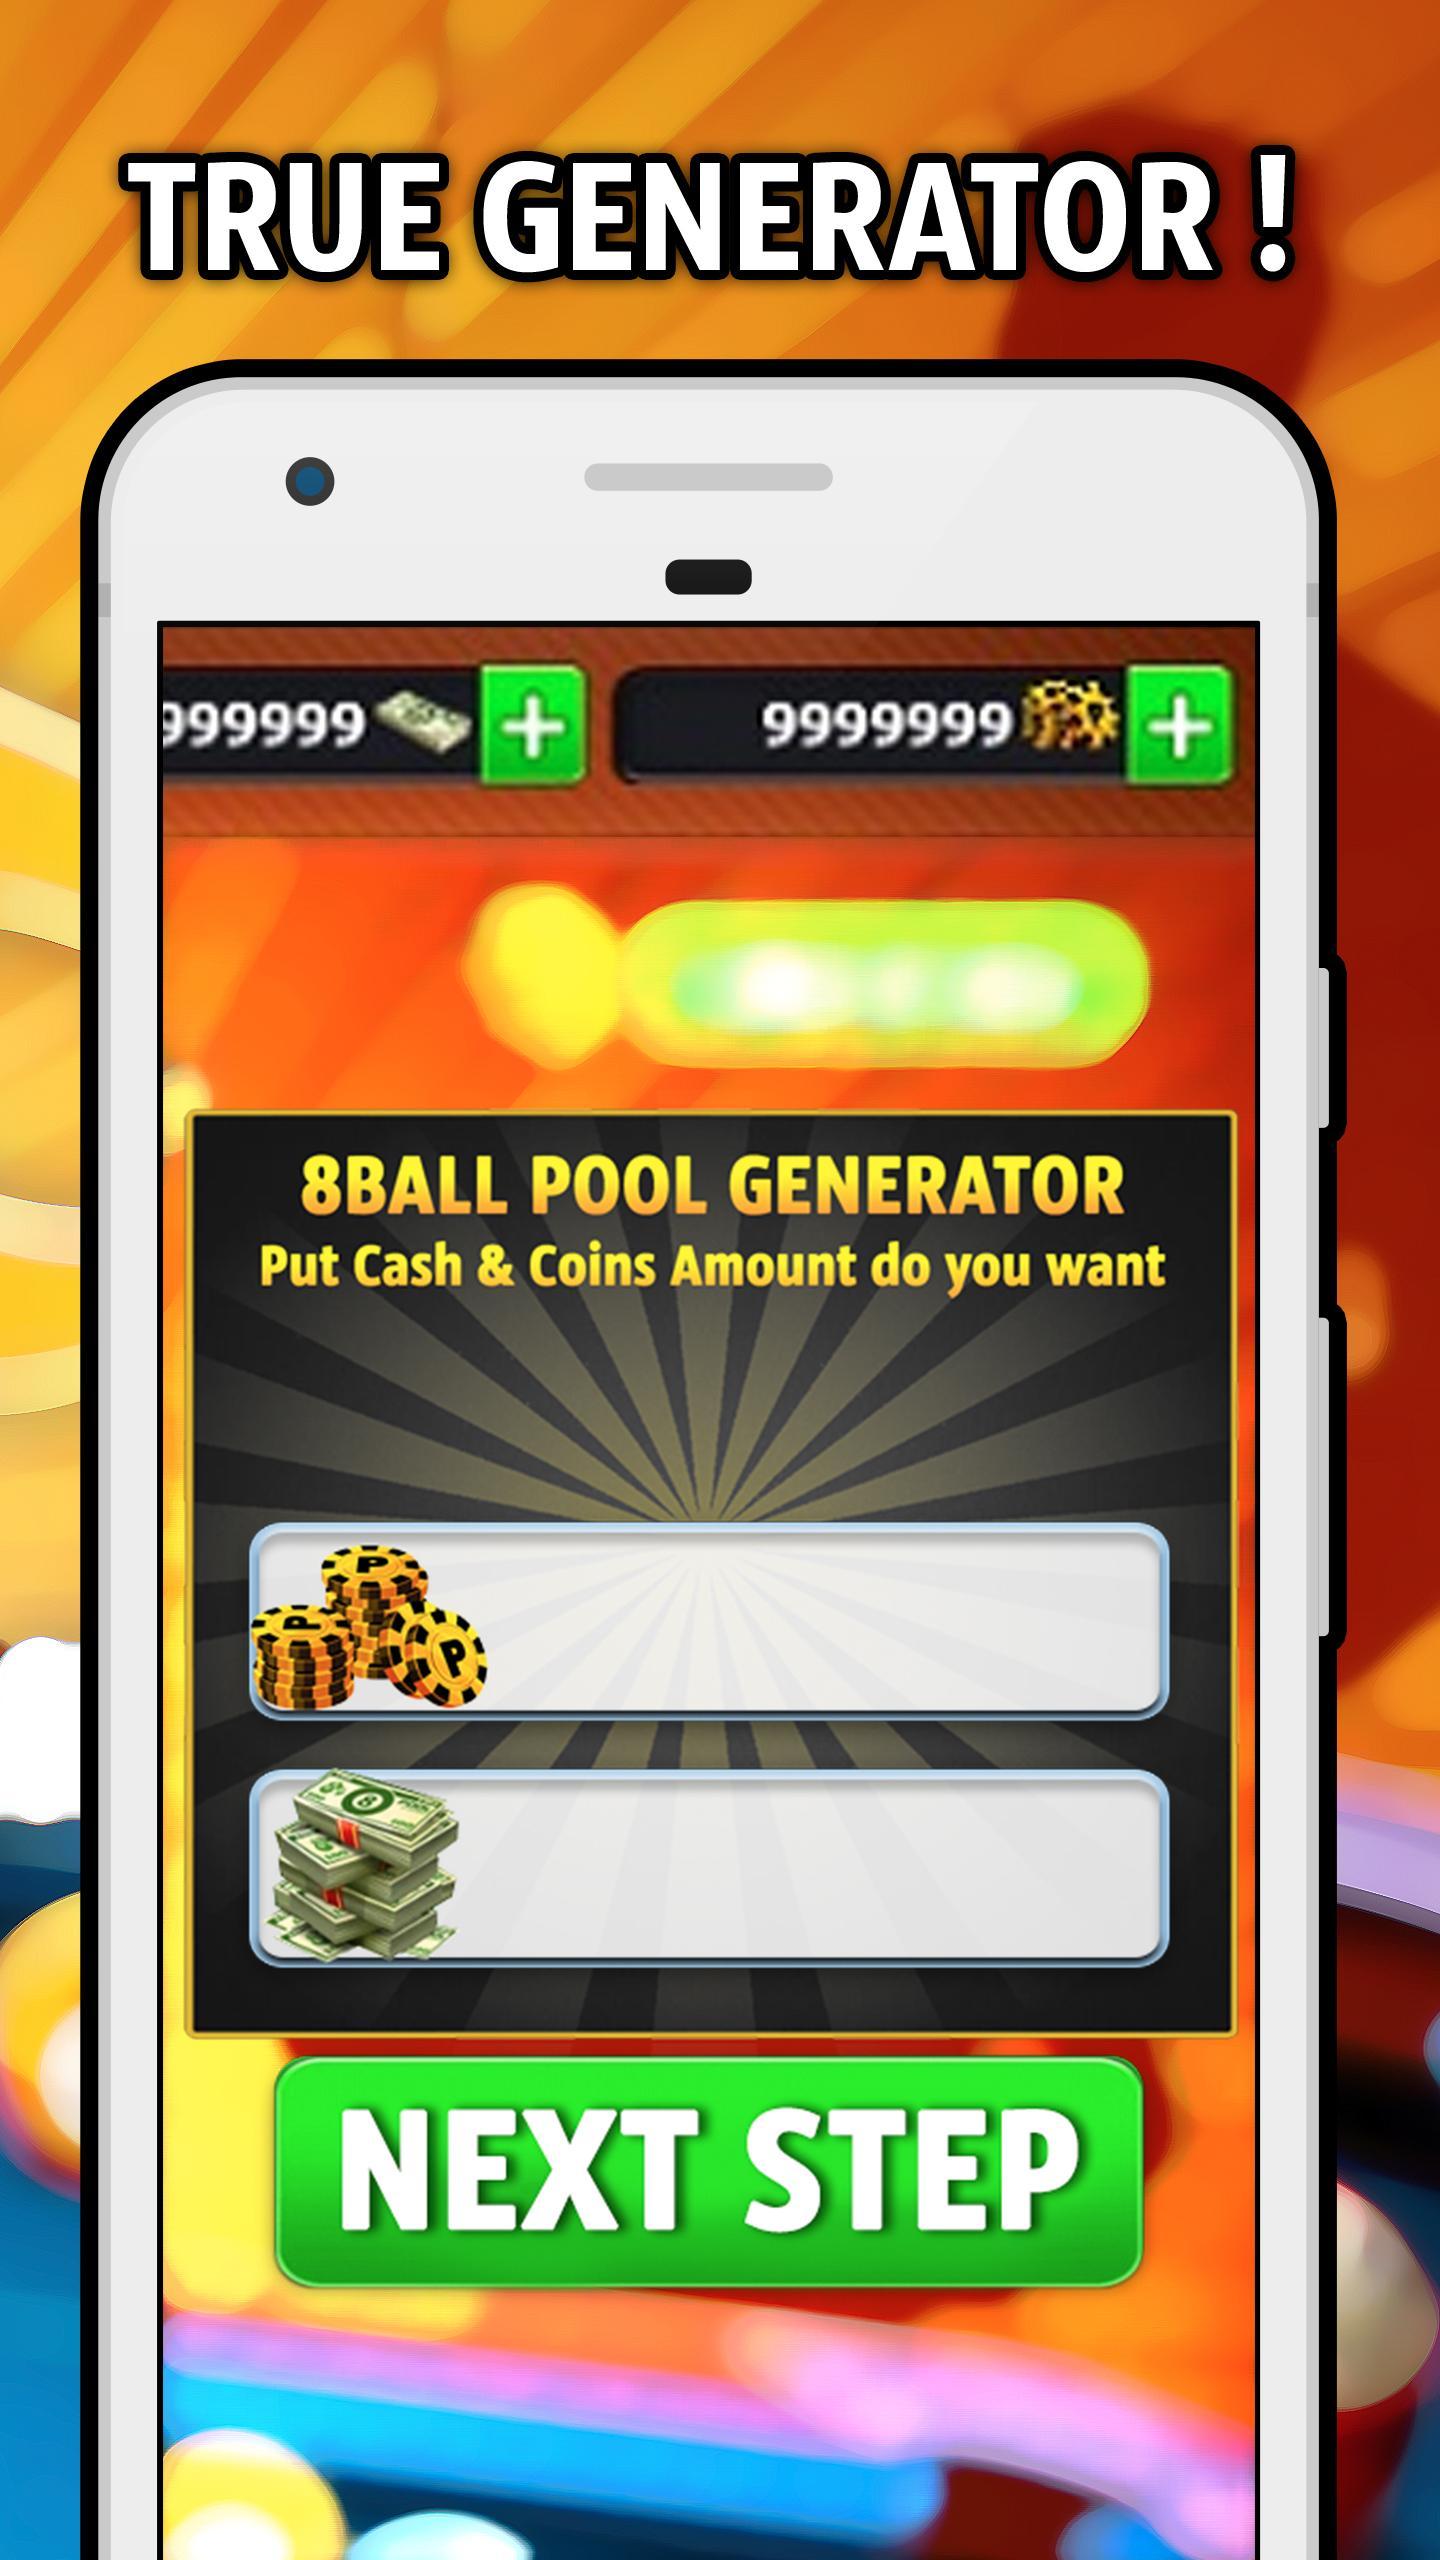 Free Coins 8ball Pool Simulator Cheats For Android Apk Download